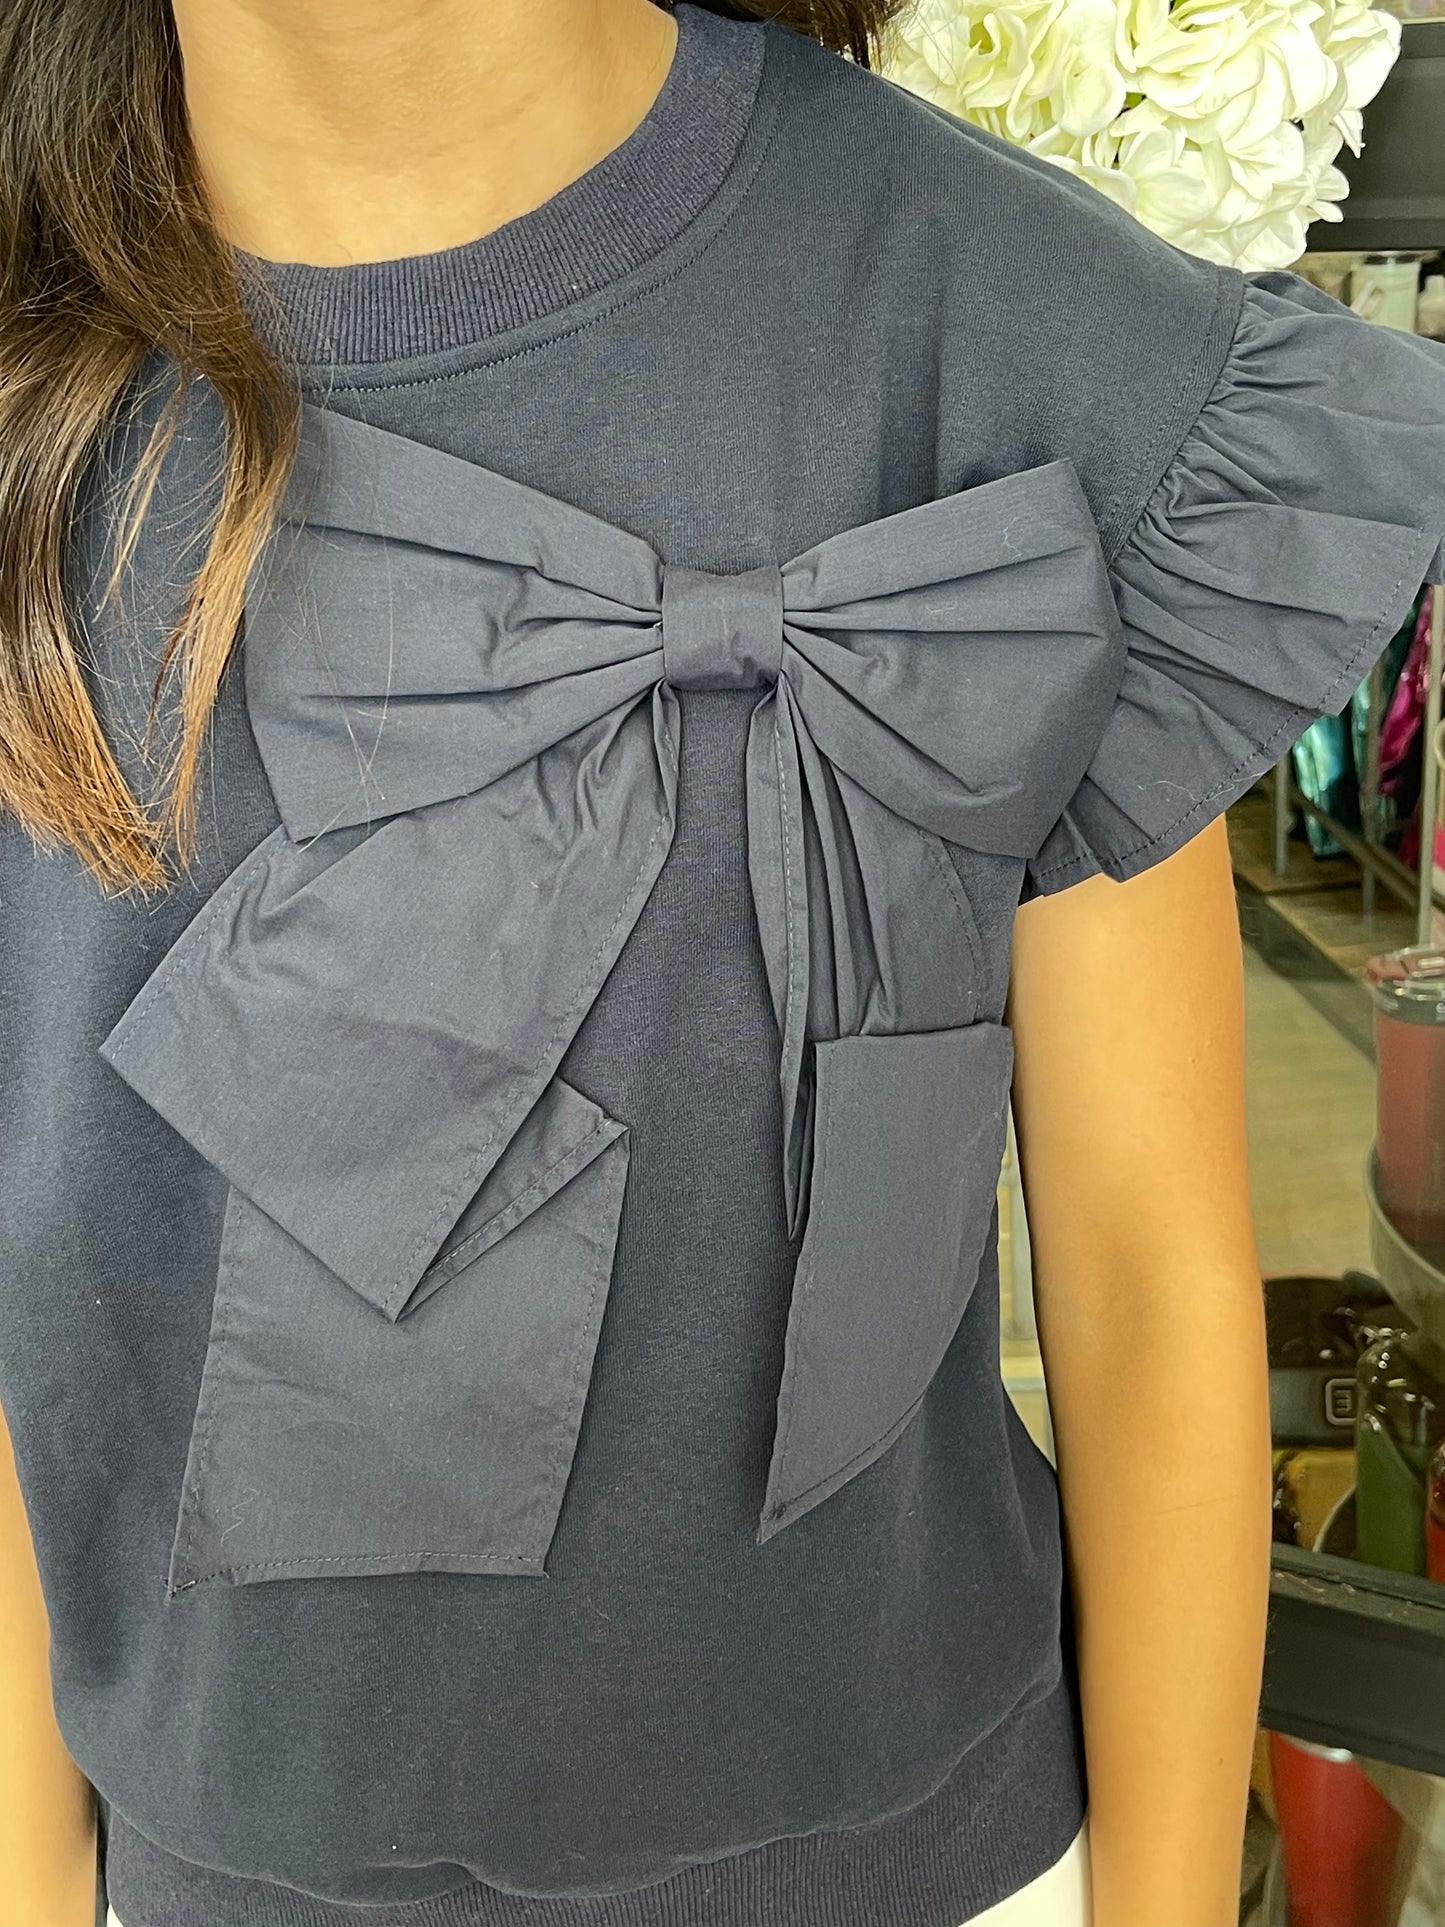 Blouse with Large Bow Accent